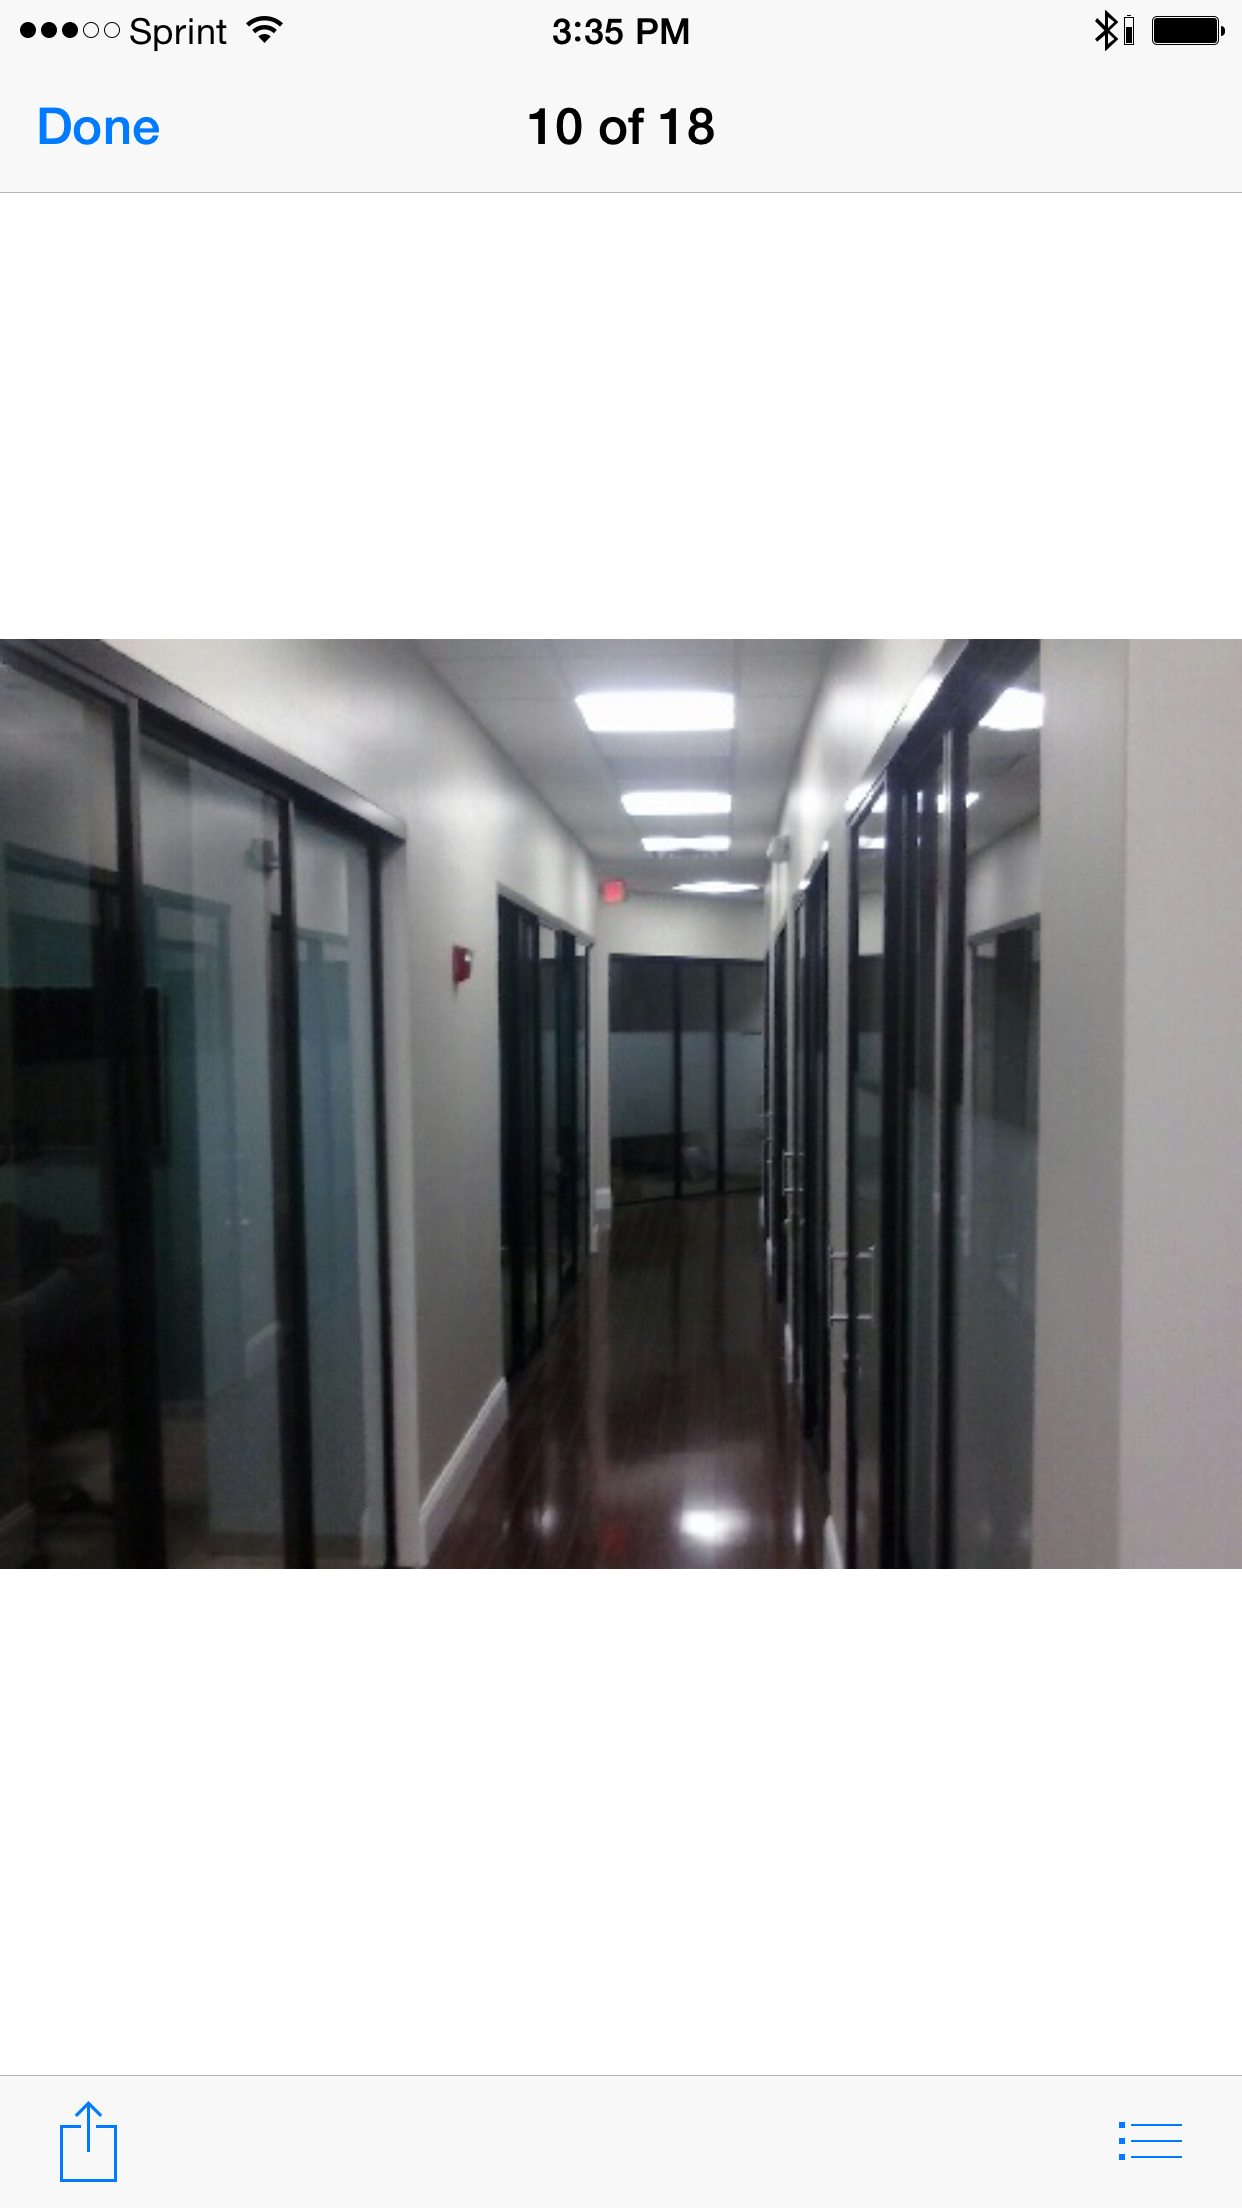 Commercial office space completed.